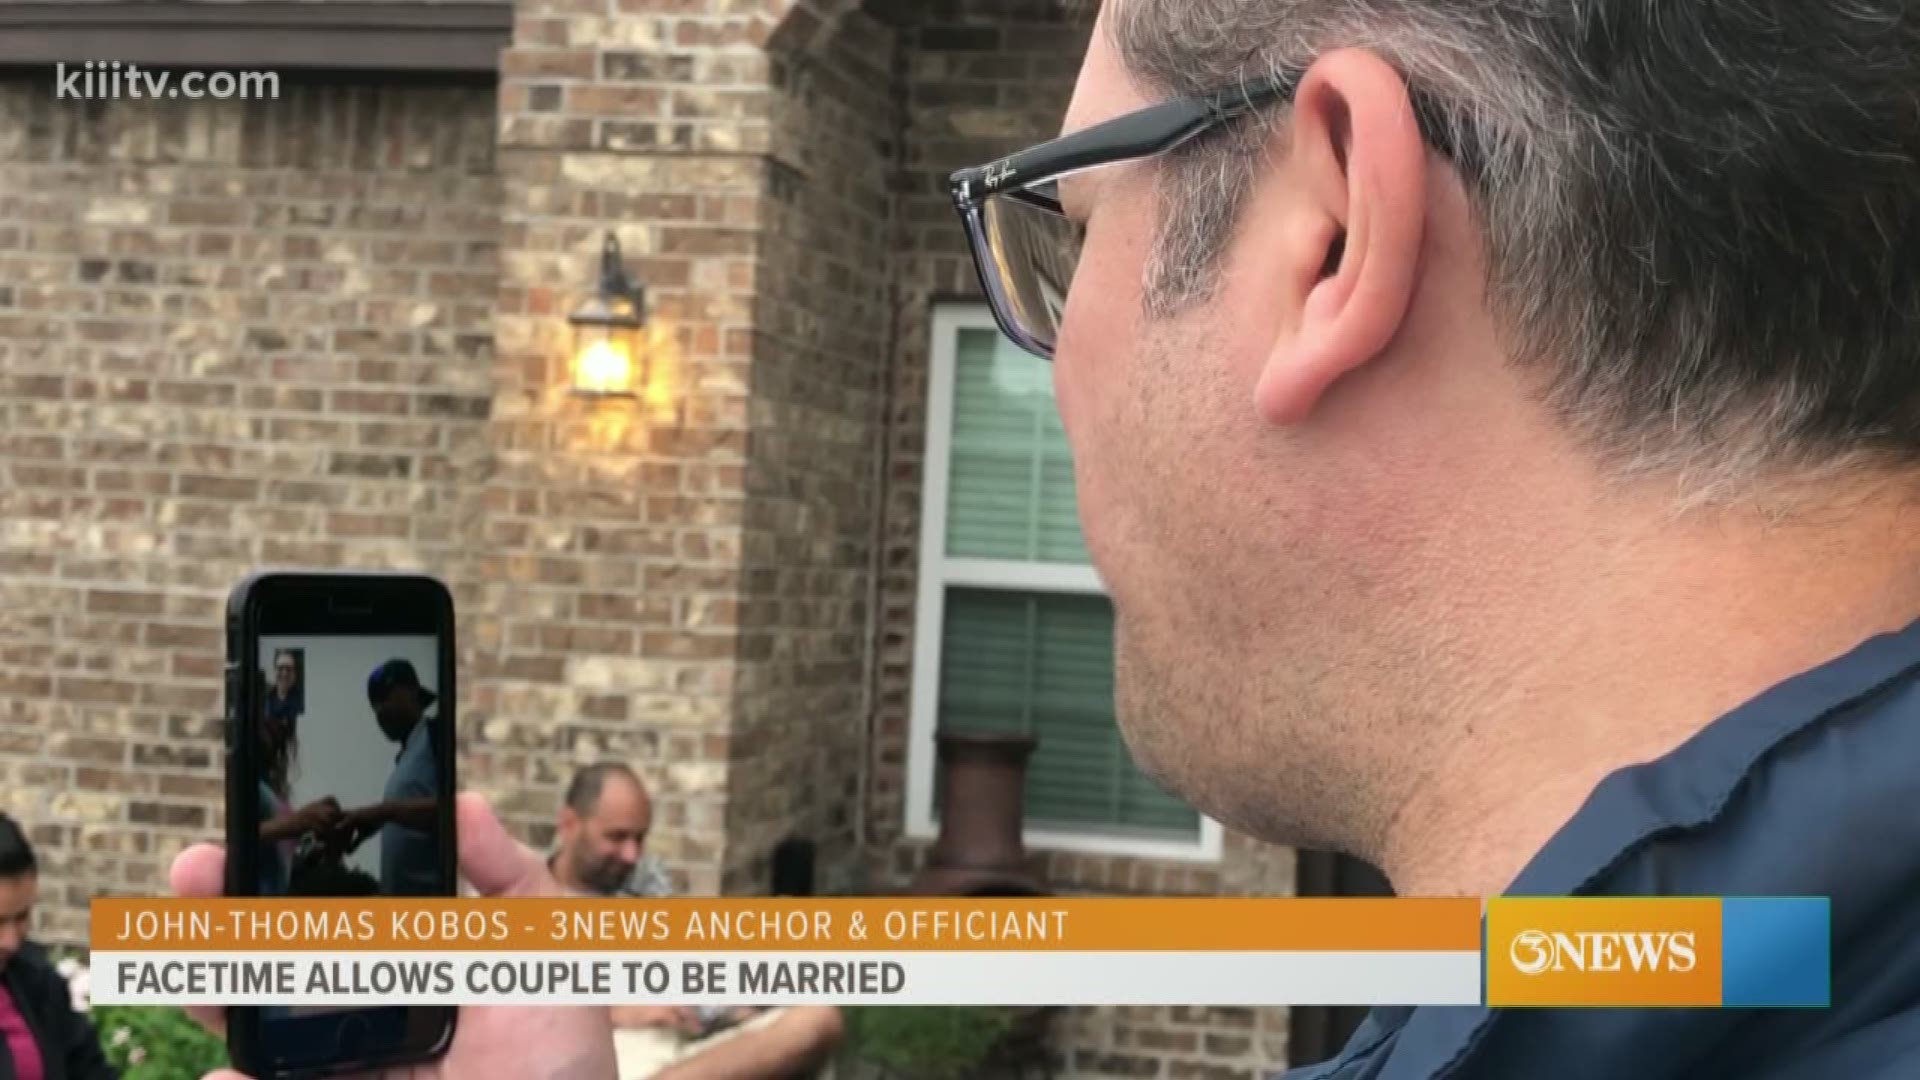 Congrats to the Seguras on their 'I dos'. Thanks to coronavirus they were forced to FaceTime with their officiant... 3News anchor John-Thomas Kobos to seal the deal.